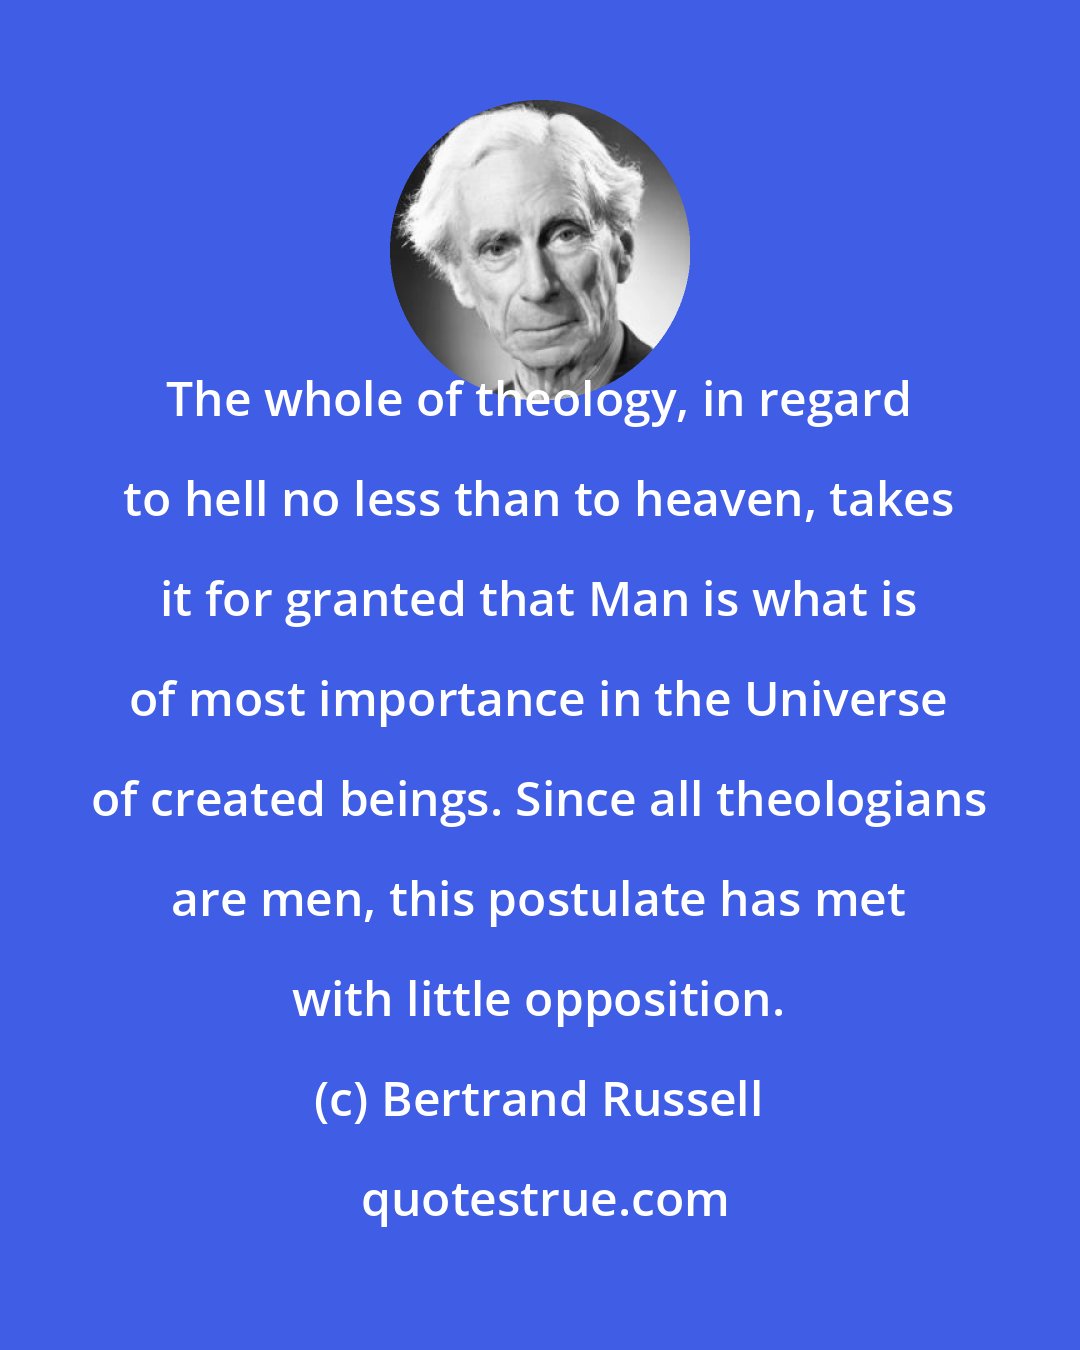 Bertrand Russell: The whole of theology, in regard to hell no less than to heaven, takes it for granted that Man is what is of most importance in the Universe of created beings. Since all theologians are men, this postulate has met with little opposition.